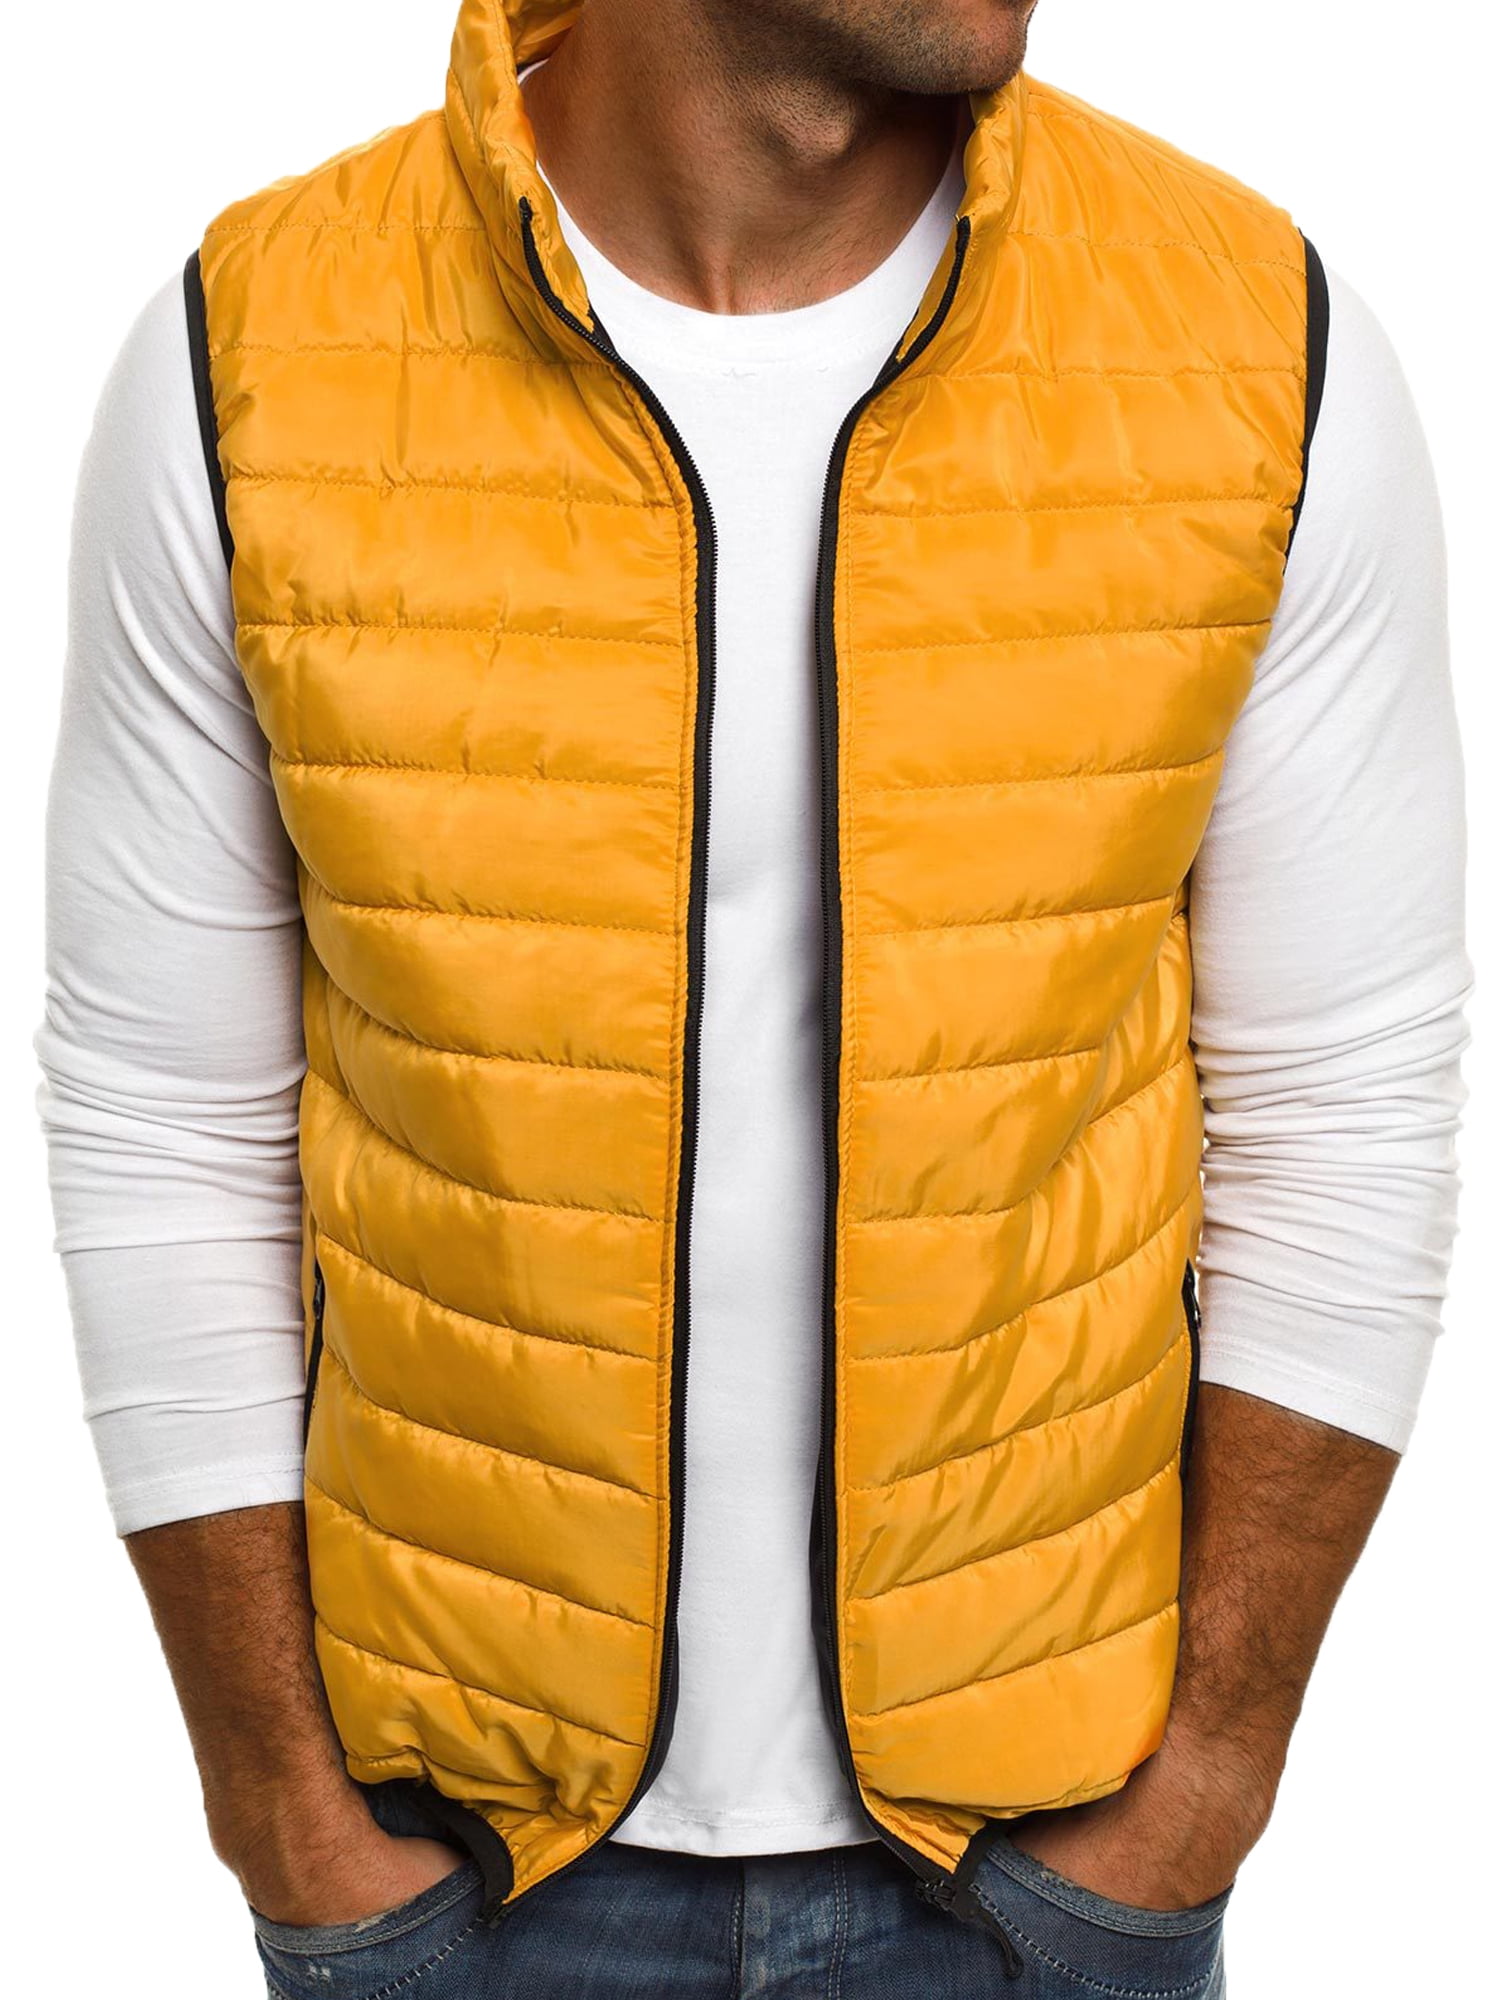 Mens Quilted Winter Vest Warm Thicken Sleeveless Puffer Jacket Pure Color Waistcoat Vest Top Coat 